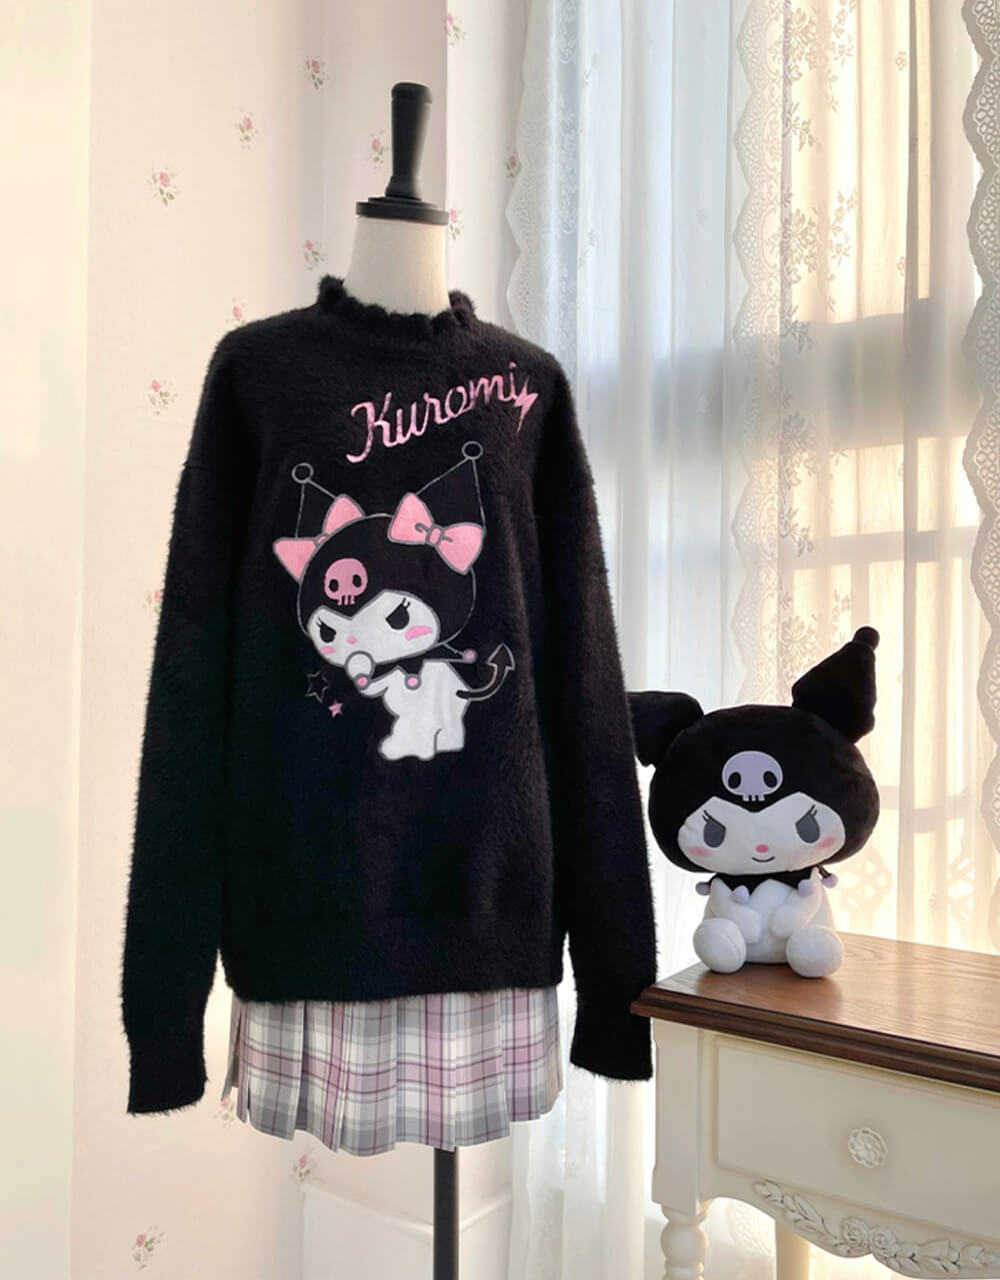 embroidery-kuromi-frilled-neckline-pullover